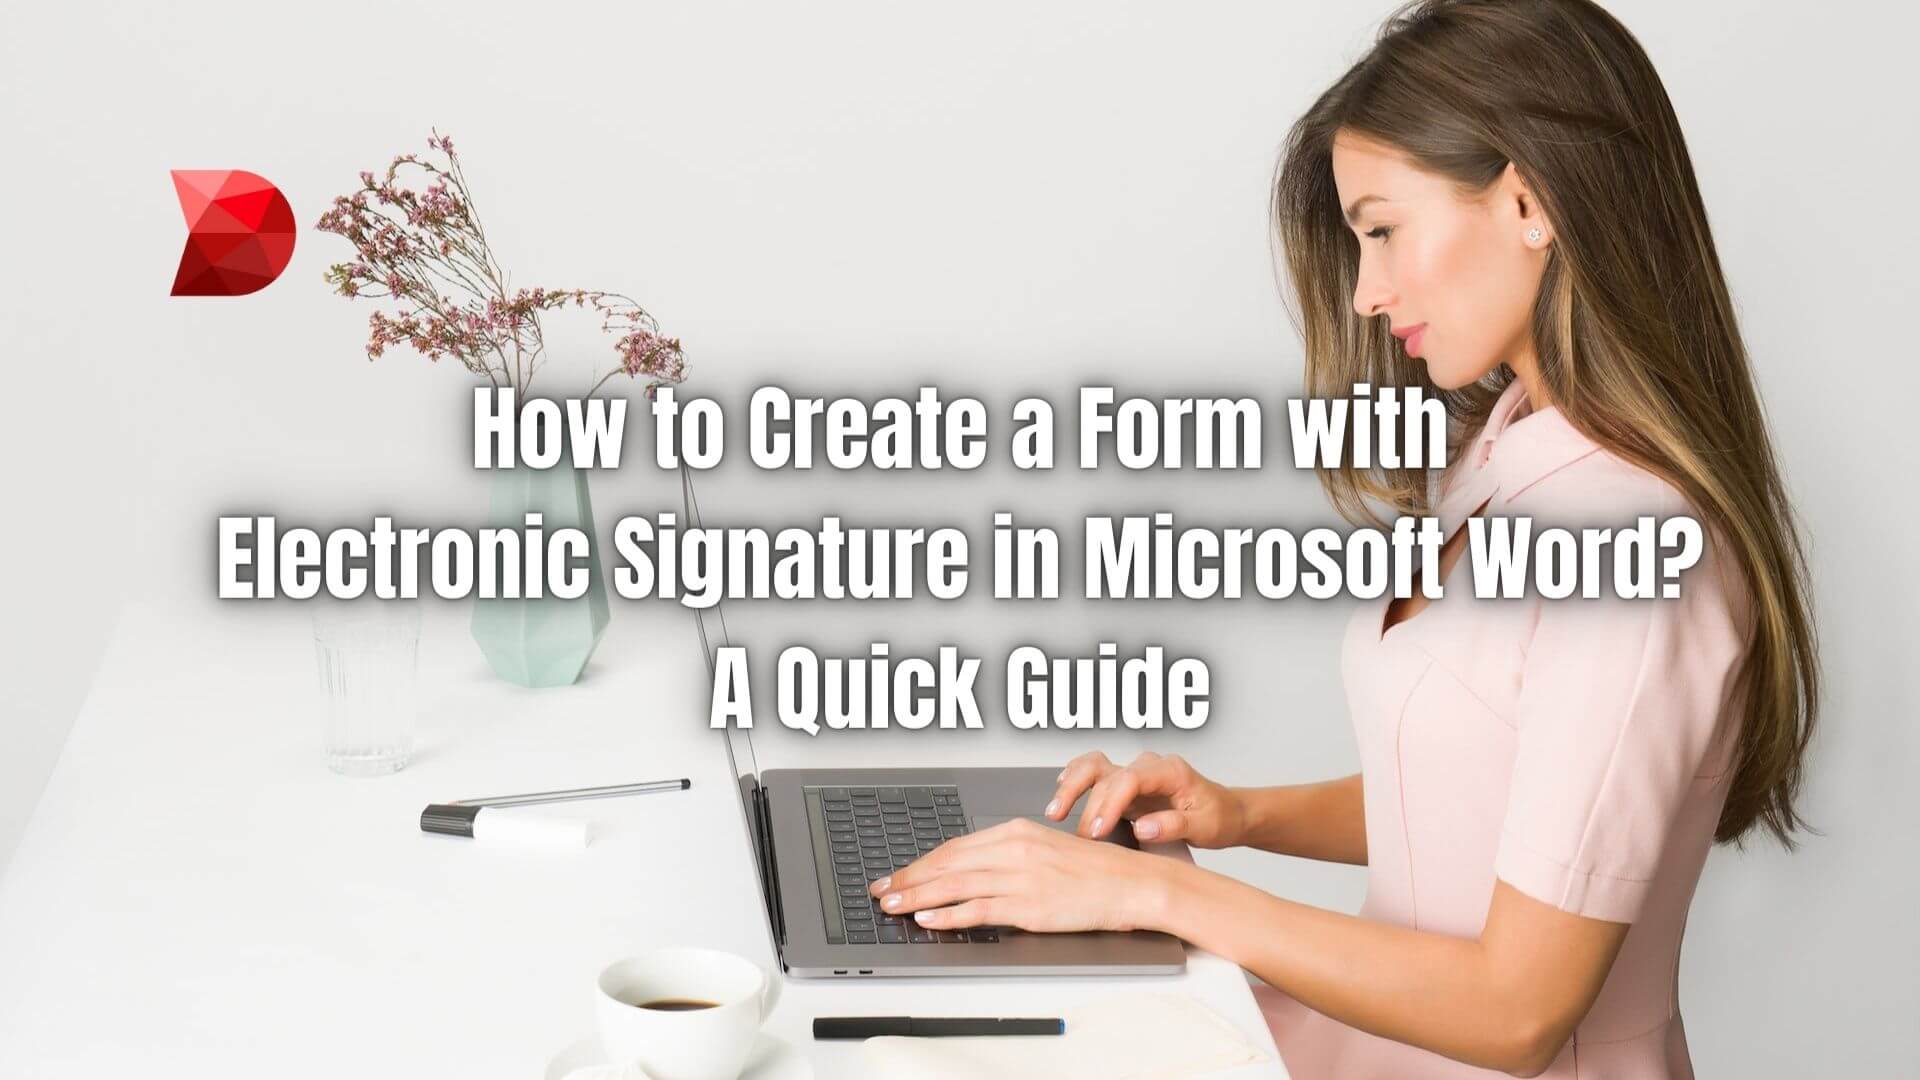 This article will show you how to create a form with an electronic signature in Microsoft Word. Read here to learn more!